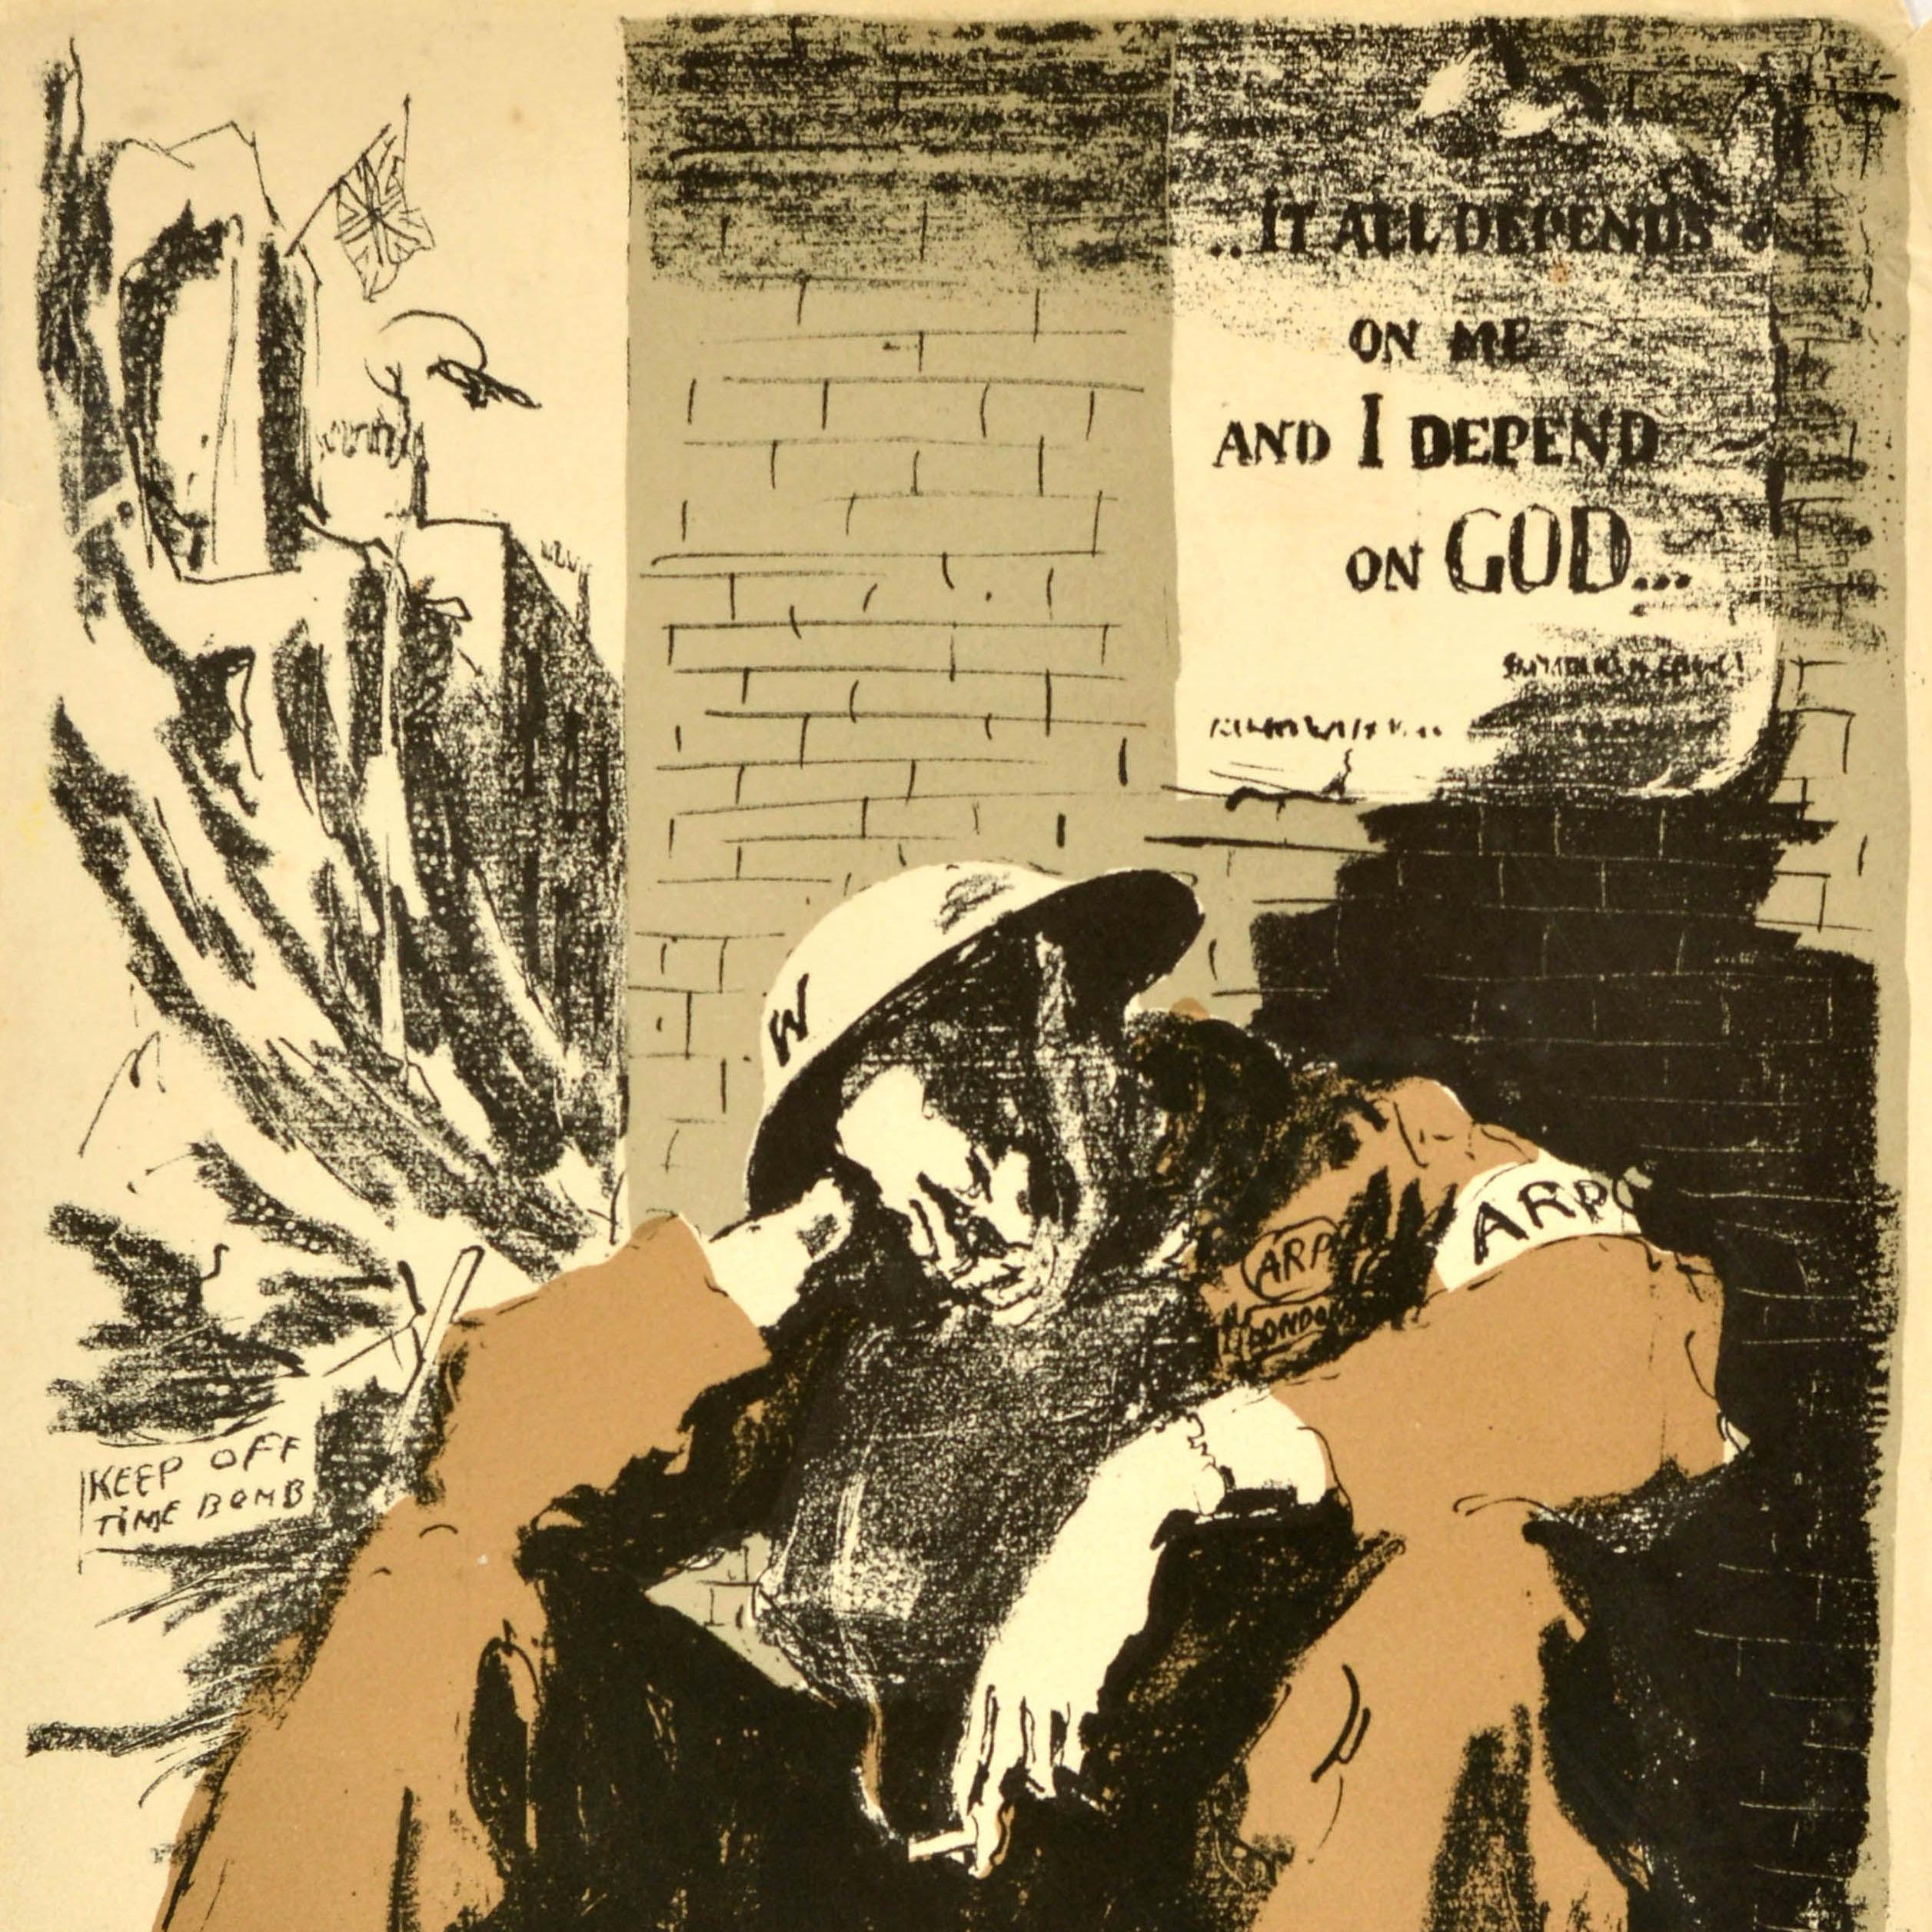 Original vintage World War Two poster featuring an image of an ARP Warden resting his head on his hand while napping against a brick wall below a notice - ... It all depends on me and I depend on God ... - with the title a quote by Winston Churchill